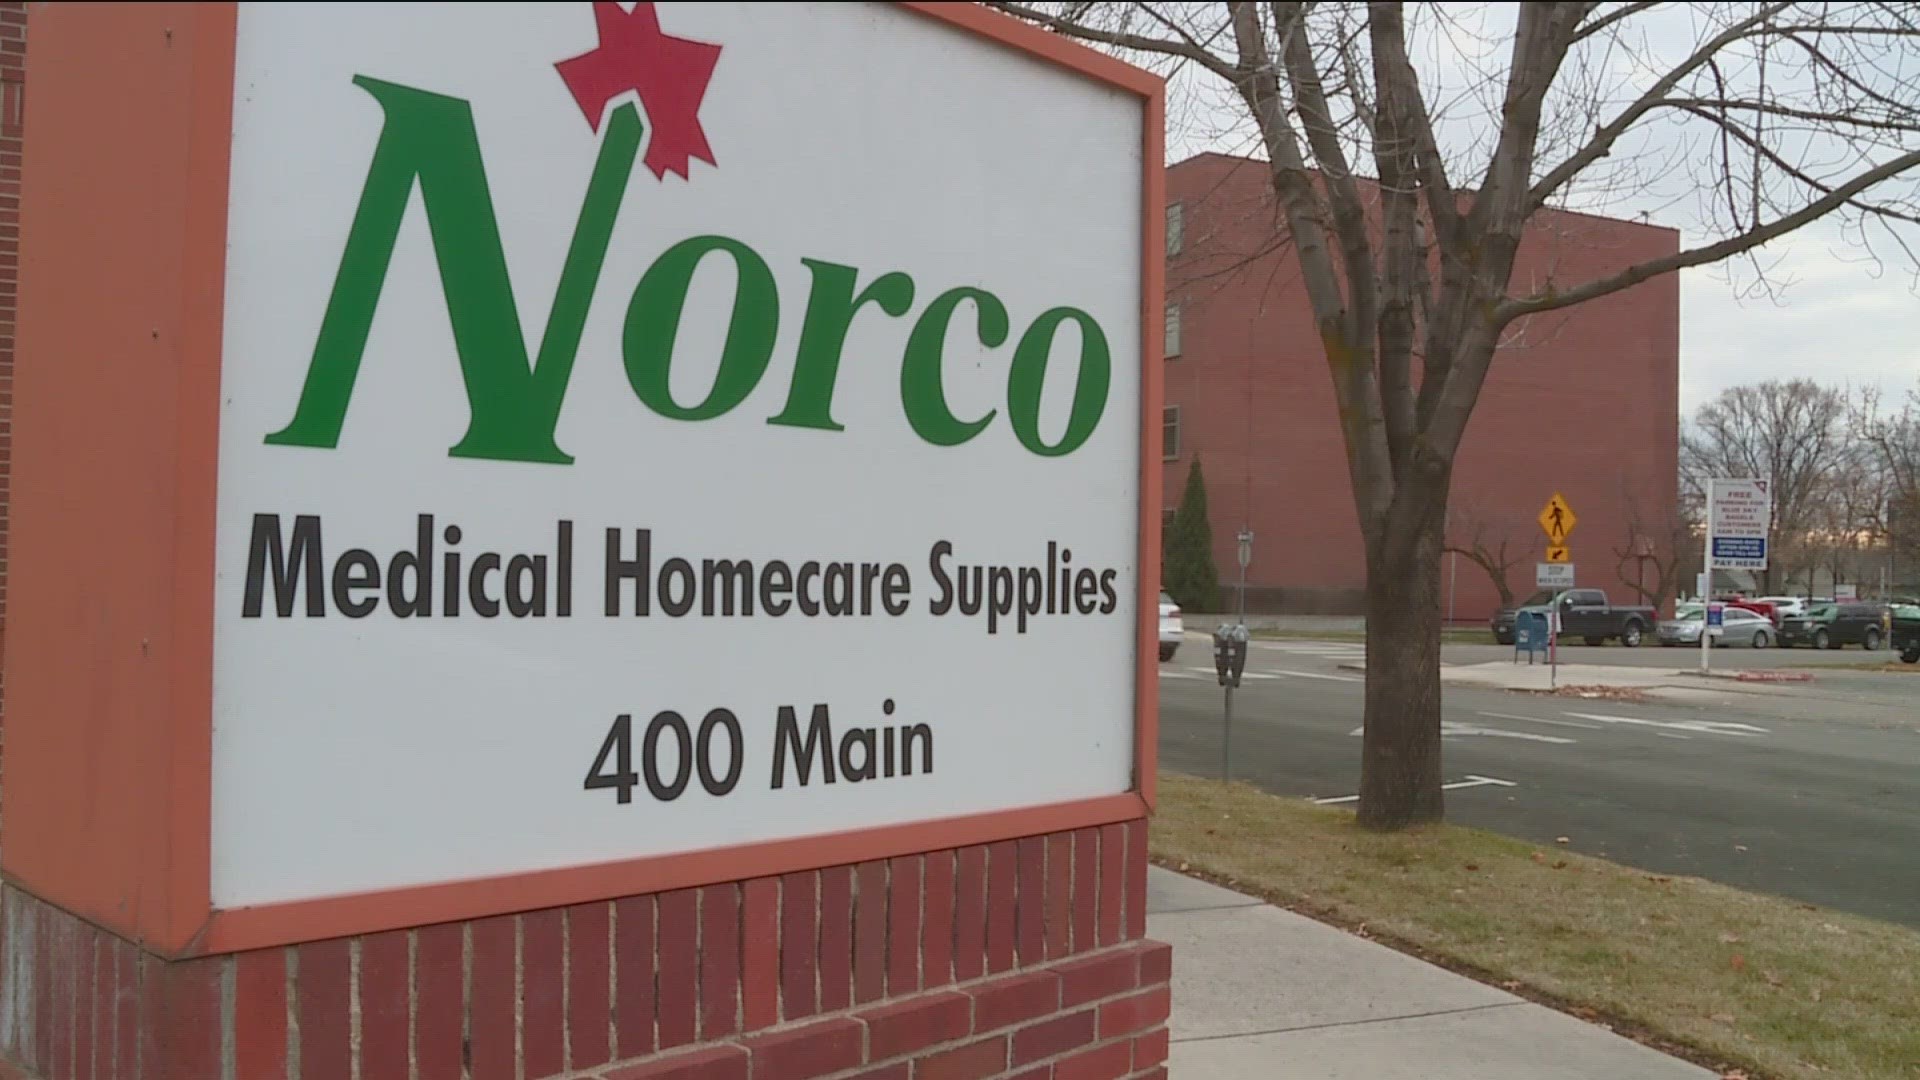 For KTVB's 16th annual 7Cares Idaho Shares campaign, Norco is showing support for Idahoans in need as a featured Company that Cares.